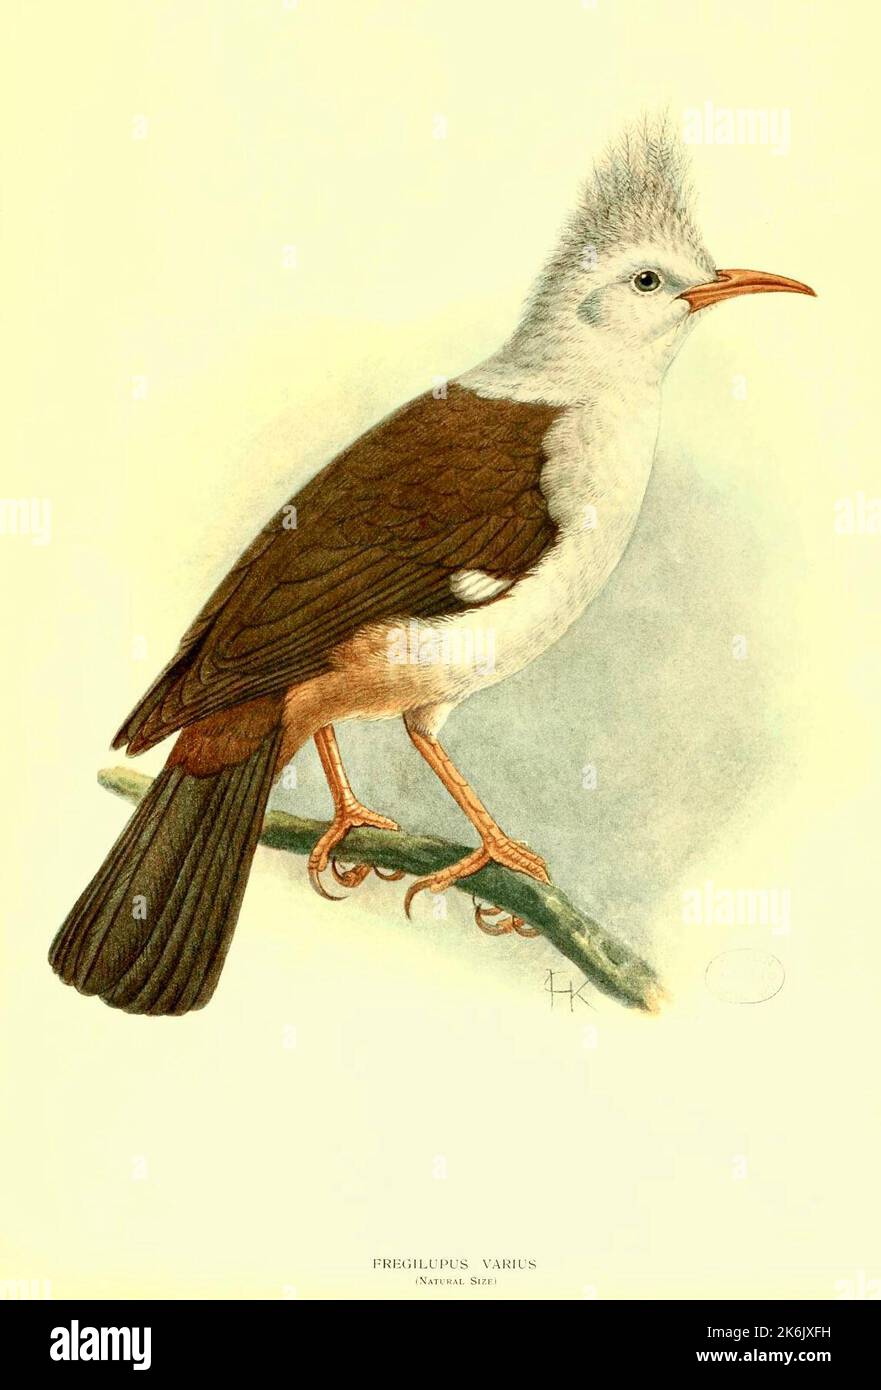 The Hoopoe Starling  -  hoopoe starling (Fregilupus varius), also known as the Reunion starling or Bourbon crested starling, is a species of starling that lived on the Mascarene island of Reunion and became extinct in the 1850s. Stock Photo